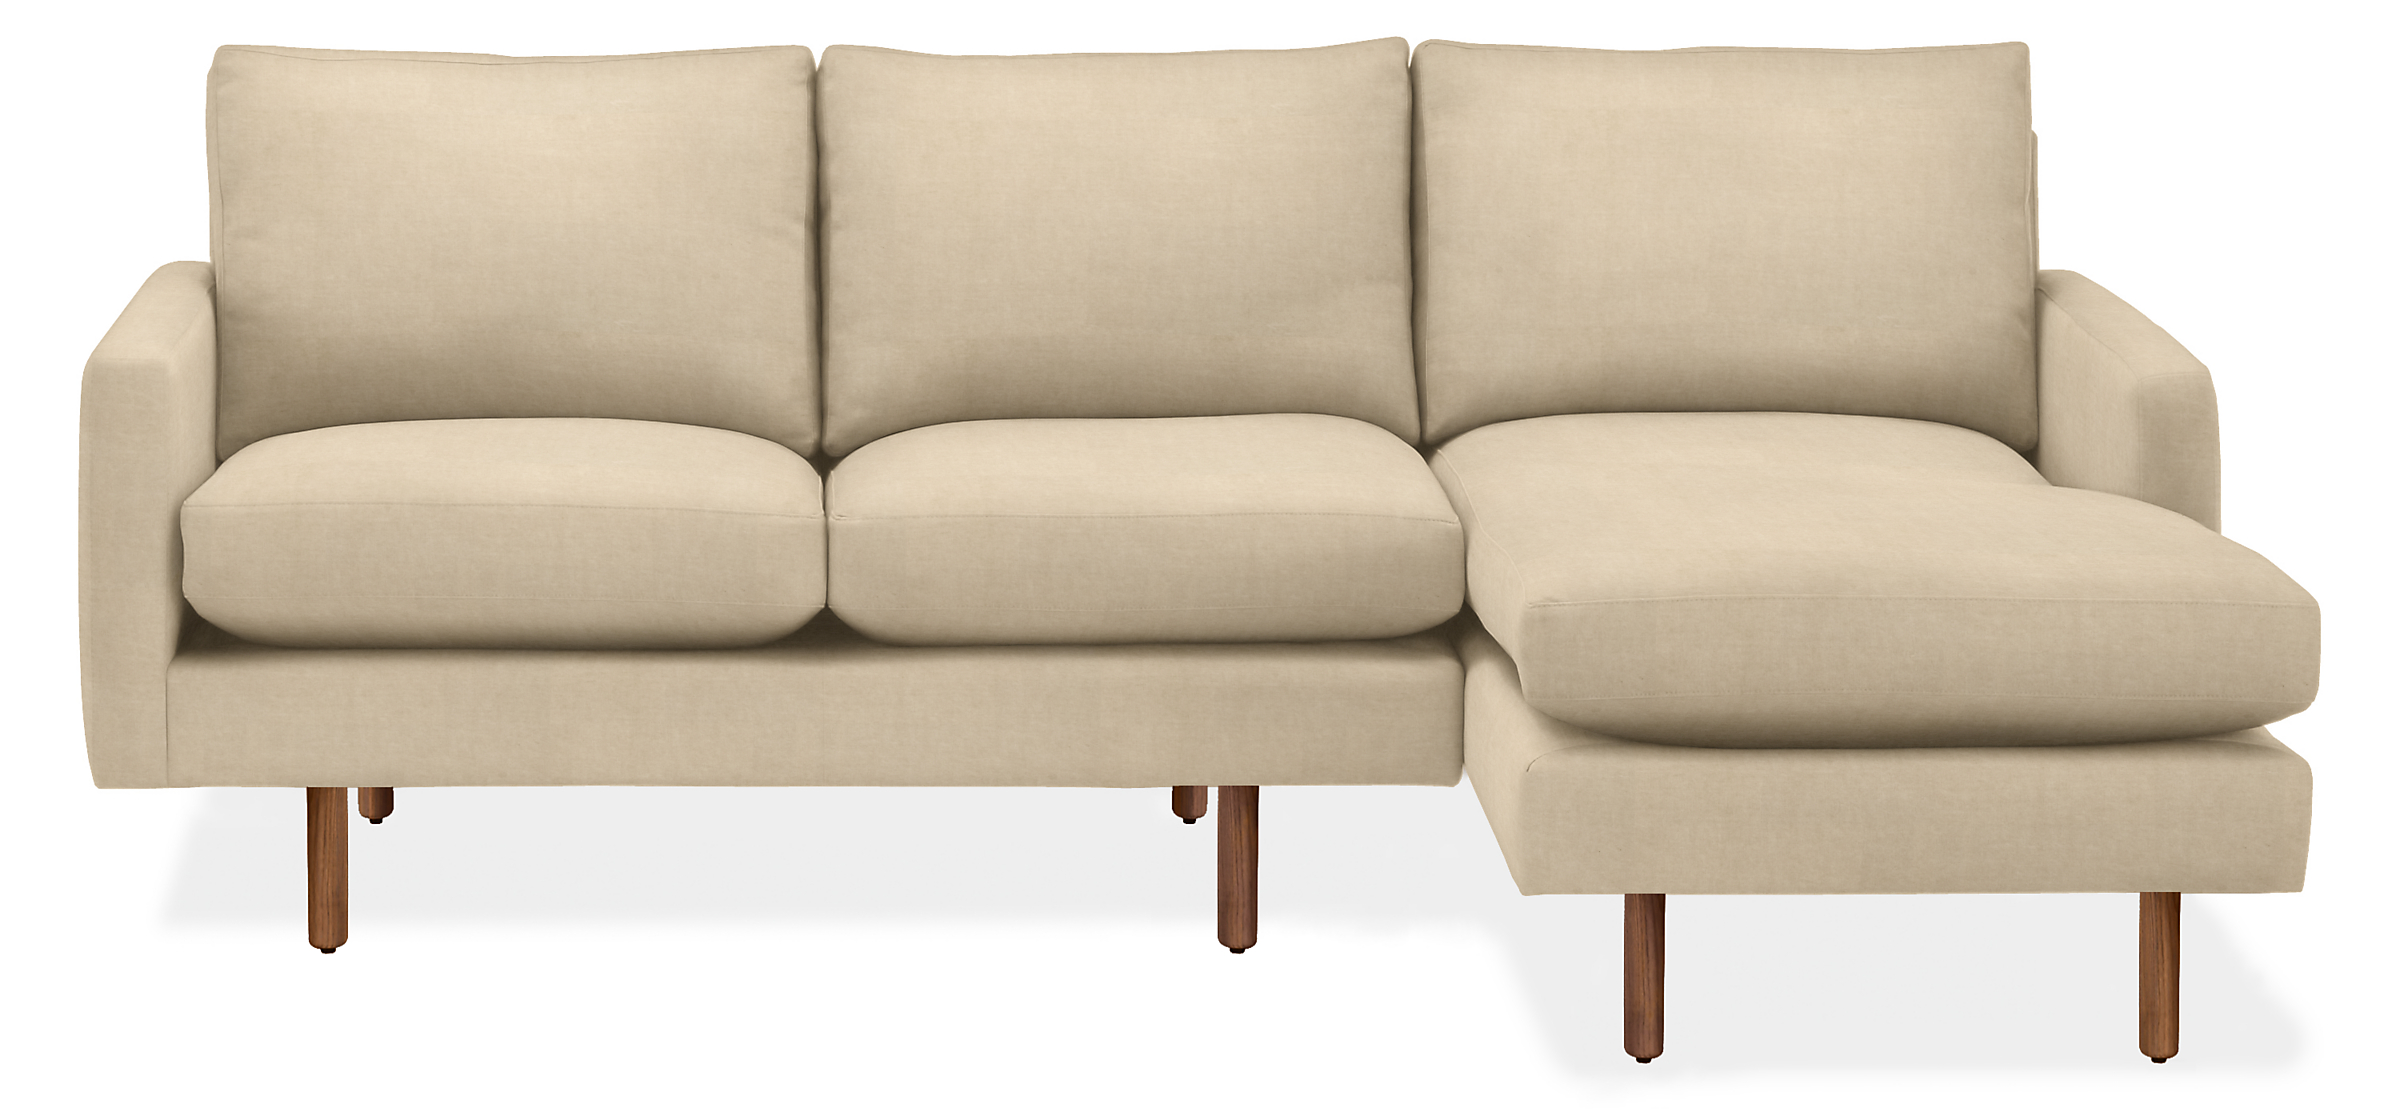 Jasper 87" Sofa with Right-Arm Chaise in View Wheat with Round Walnut Legs